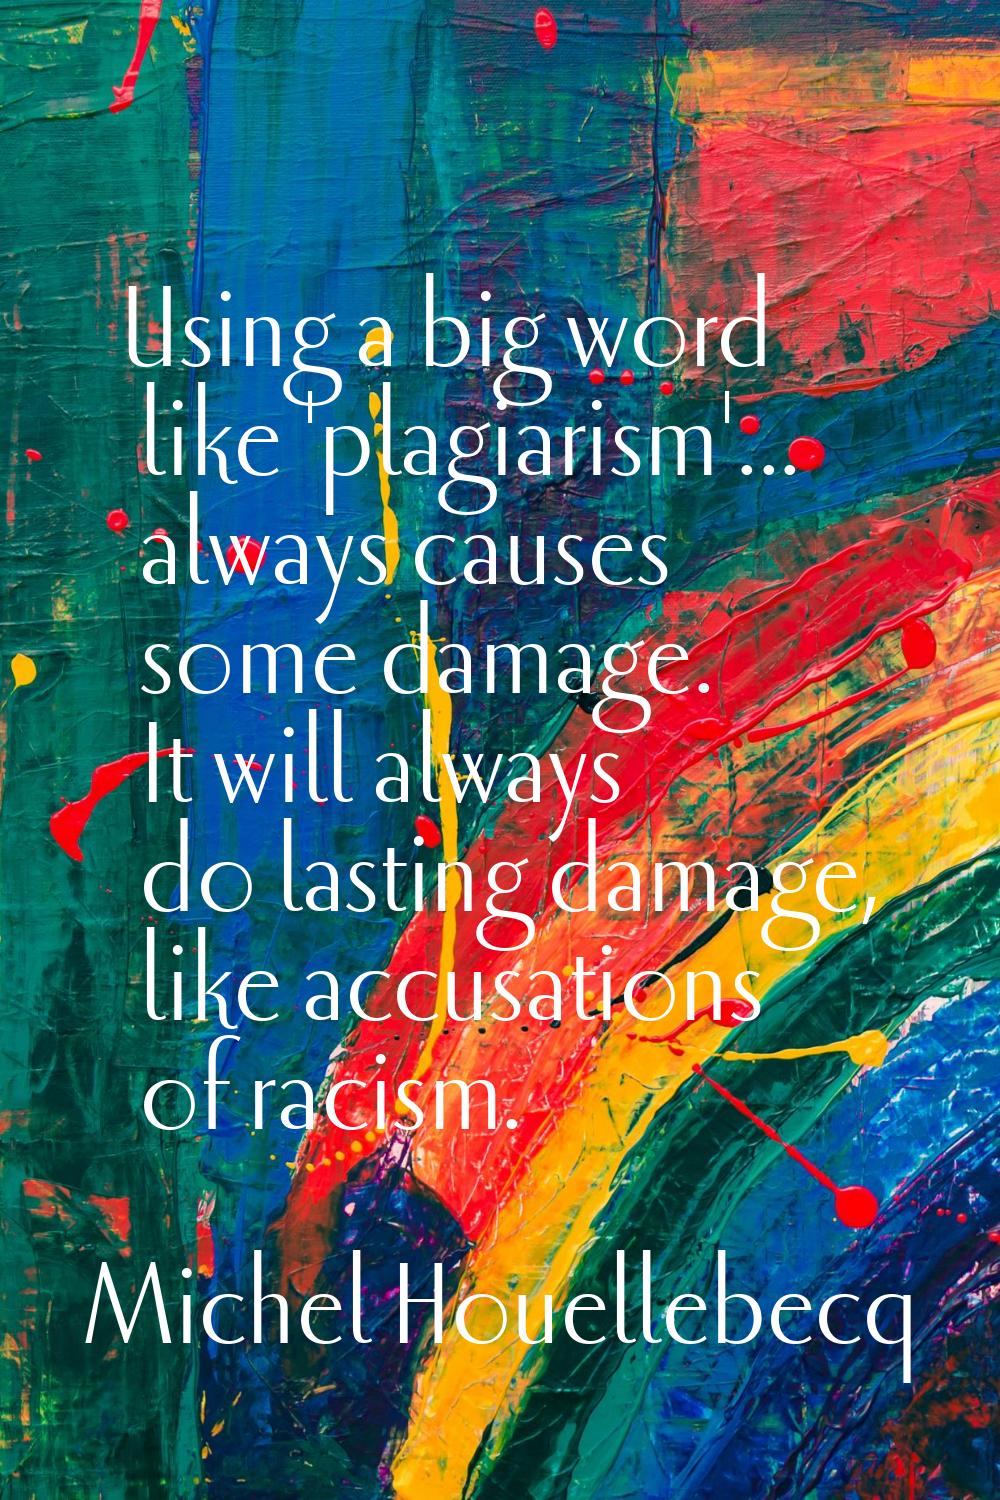 Using a big word like 'plagiarism'... always causes some damage. It will always do lasting damage, 